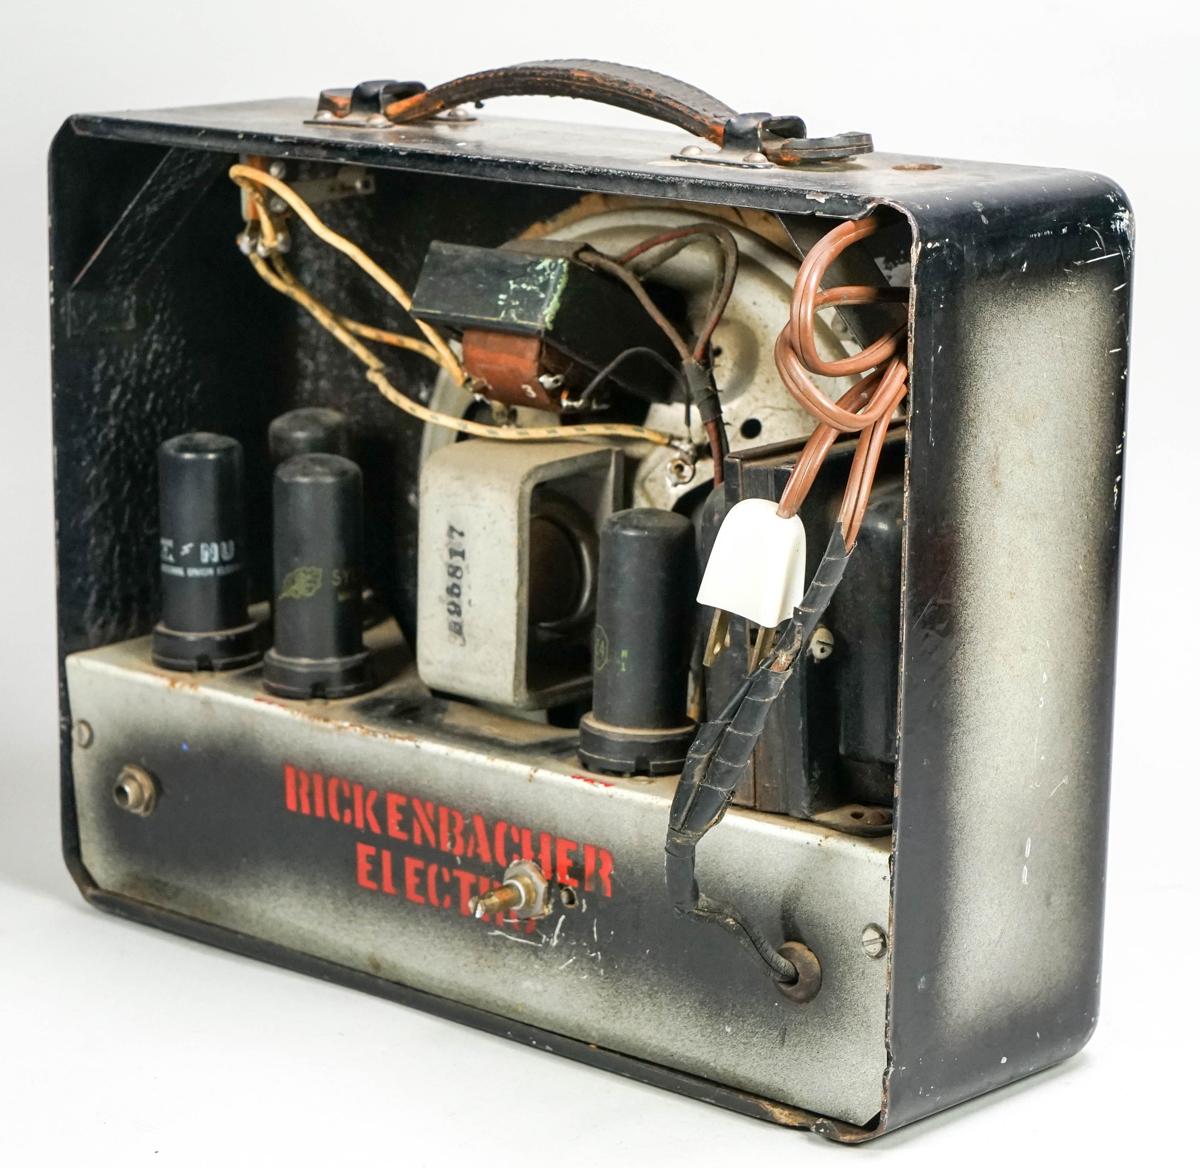 Rickenbacker "Lunchbox"  Electro Electric Guitar Amp, Ca. Late 1930's